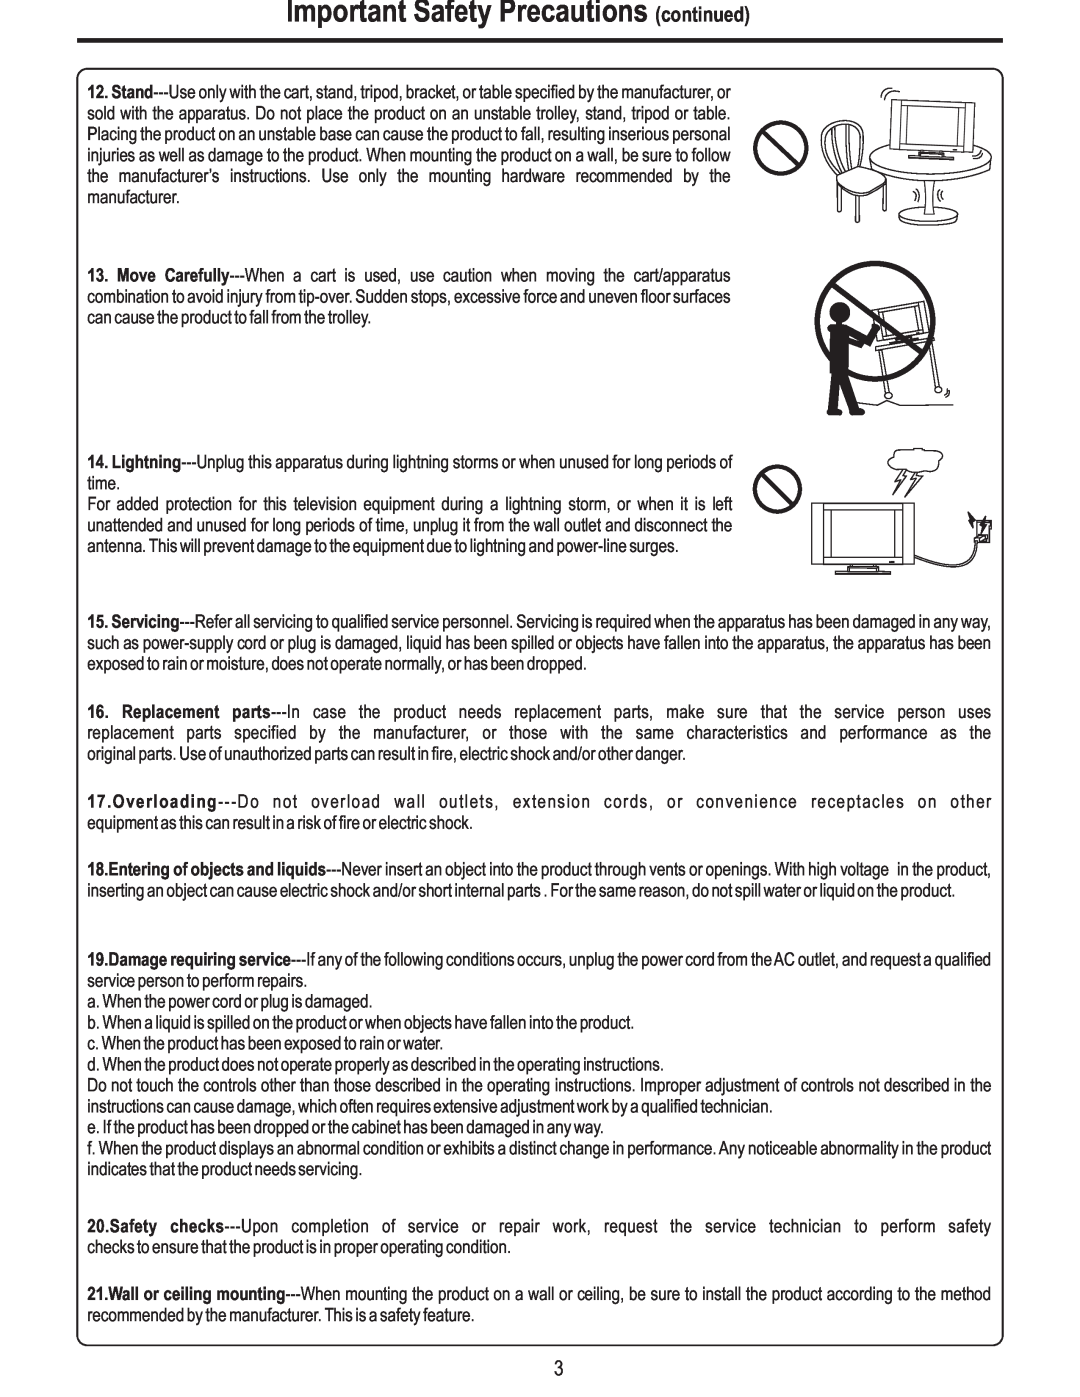 Polaroid FLM-3225 manual Important Safety Precautions continued 